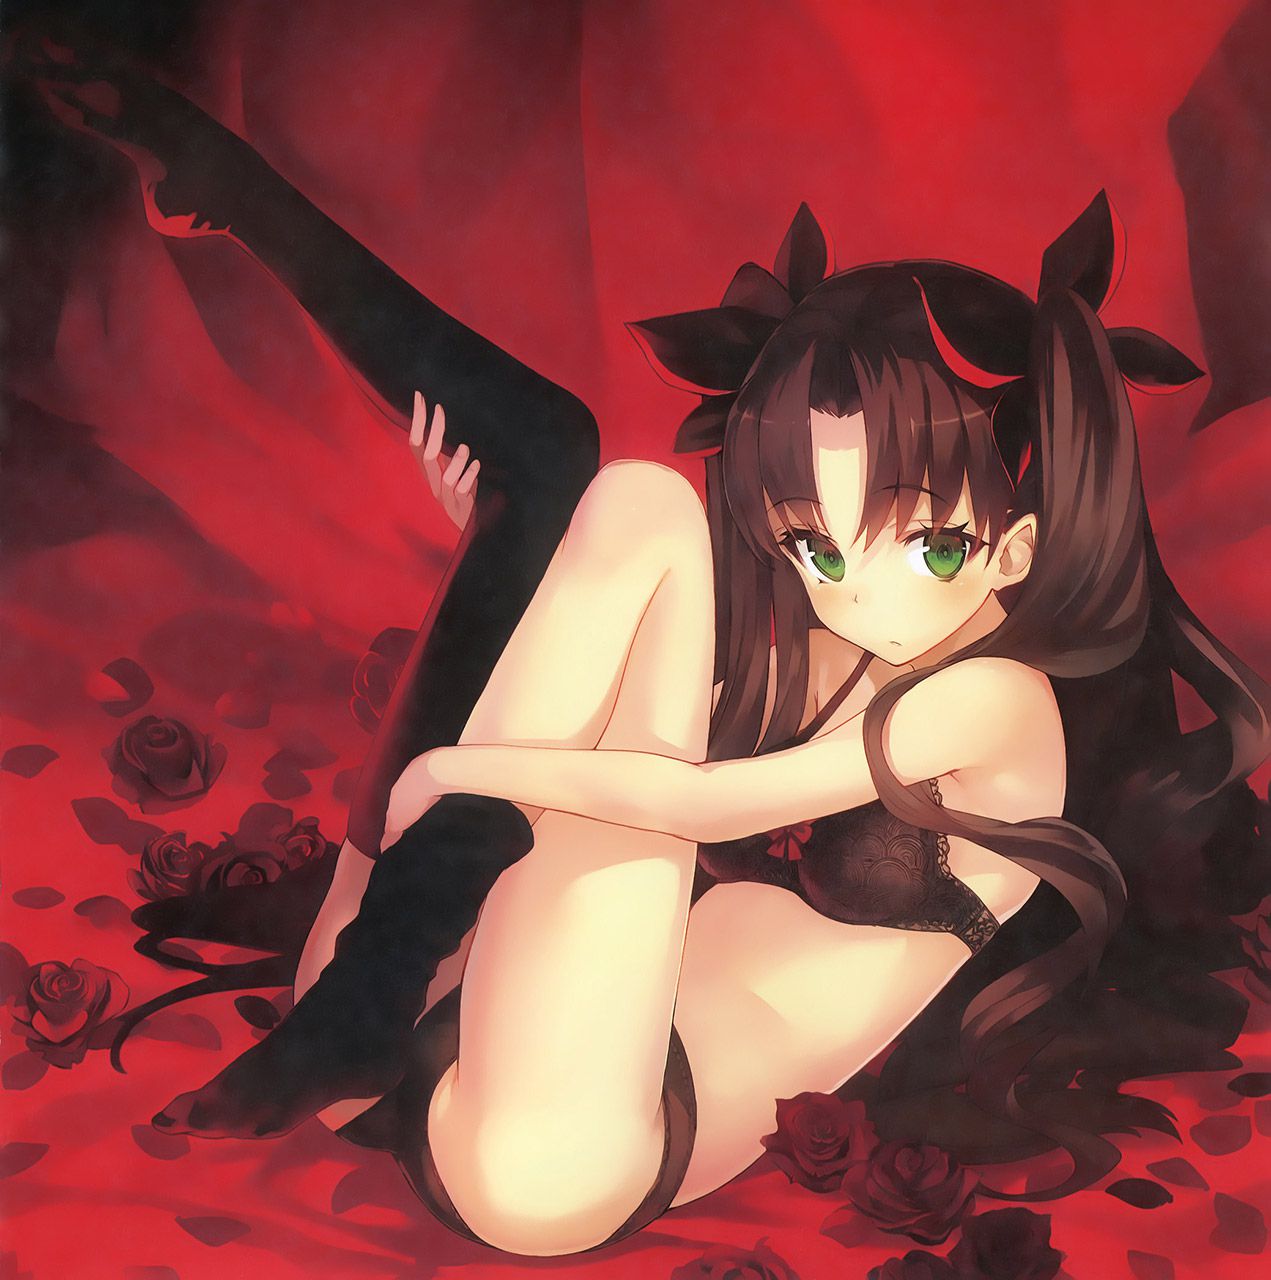 2D-fate/stay night tohsaka Rin-Chan prpr erotic pictures 68 photos 56